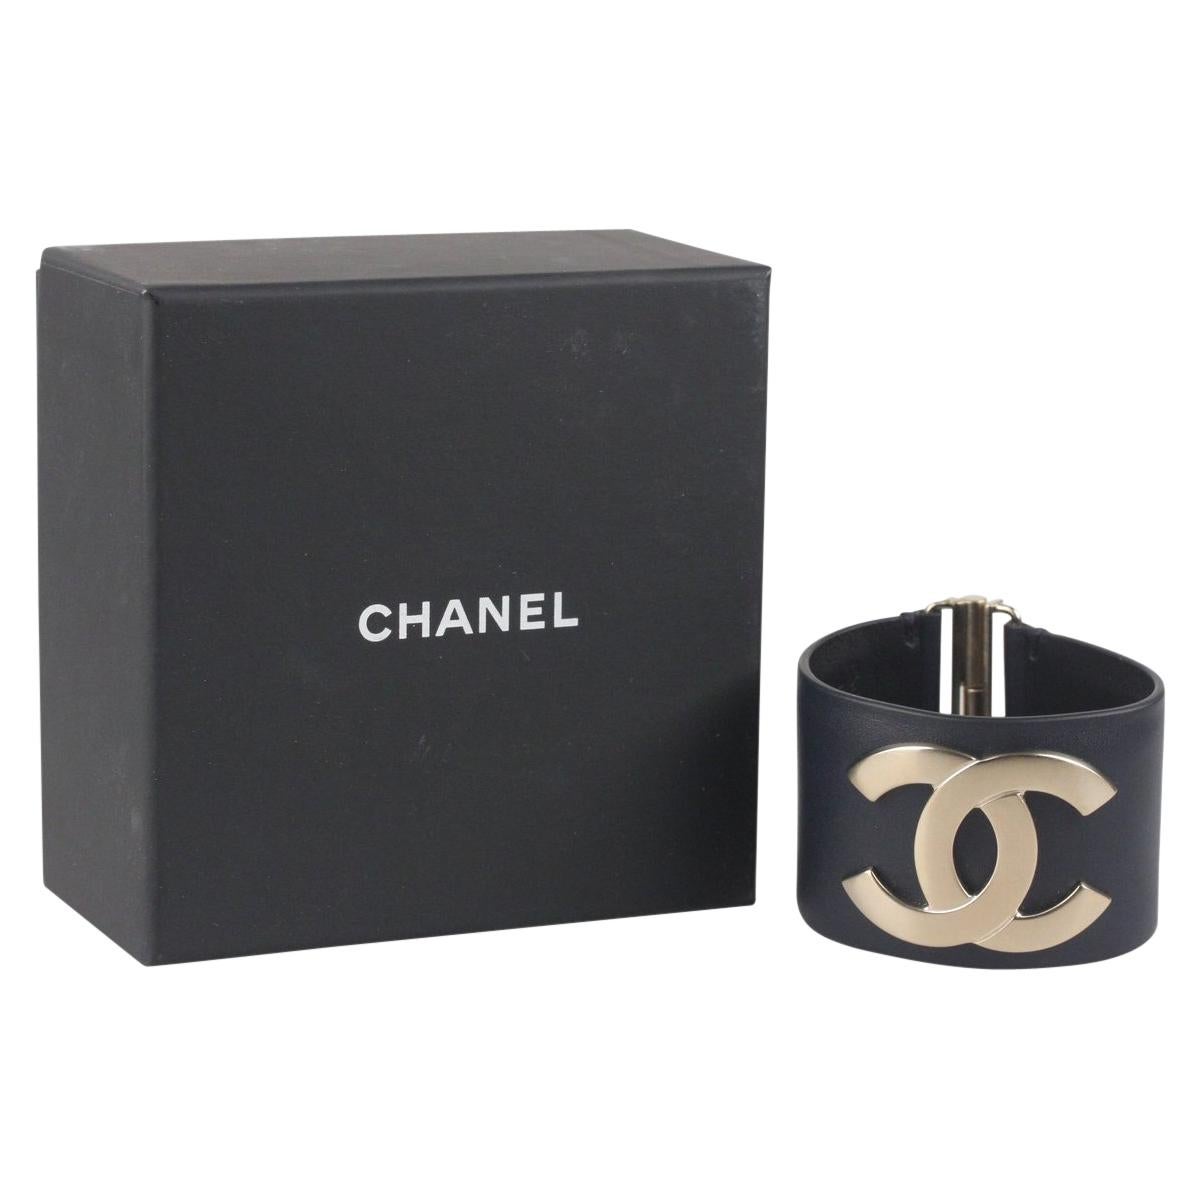 CHANEL Dark Blue Leather Exclusive Edition 2017 Armband Bracelet with box